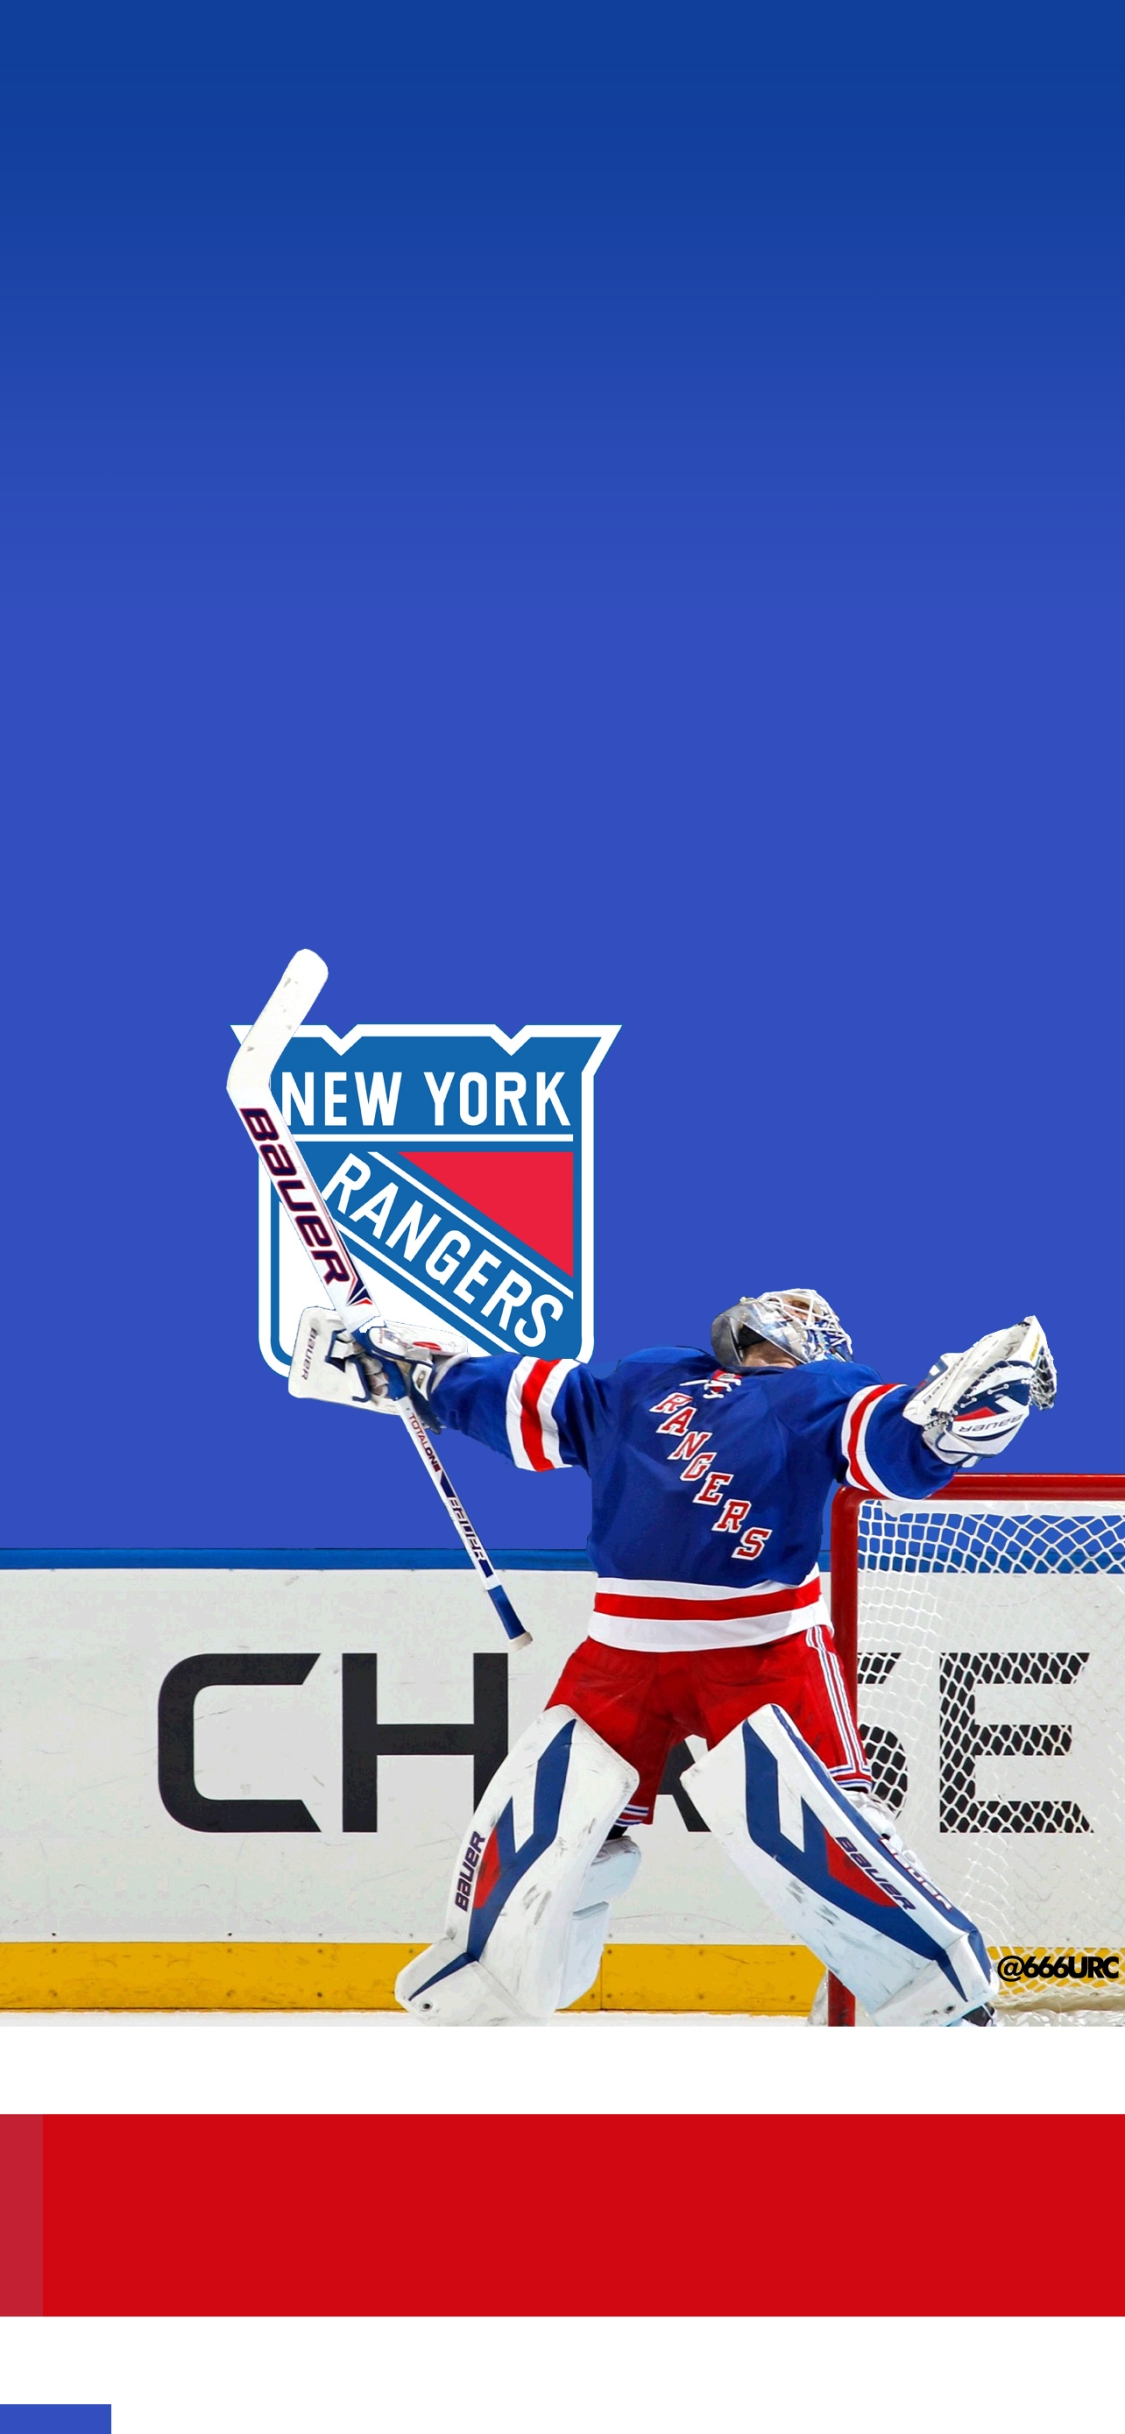 phone wallpaper displaying NYR // lundqvist (hank's ECSF win over the caps)